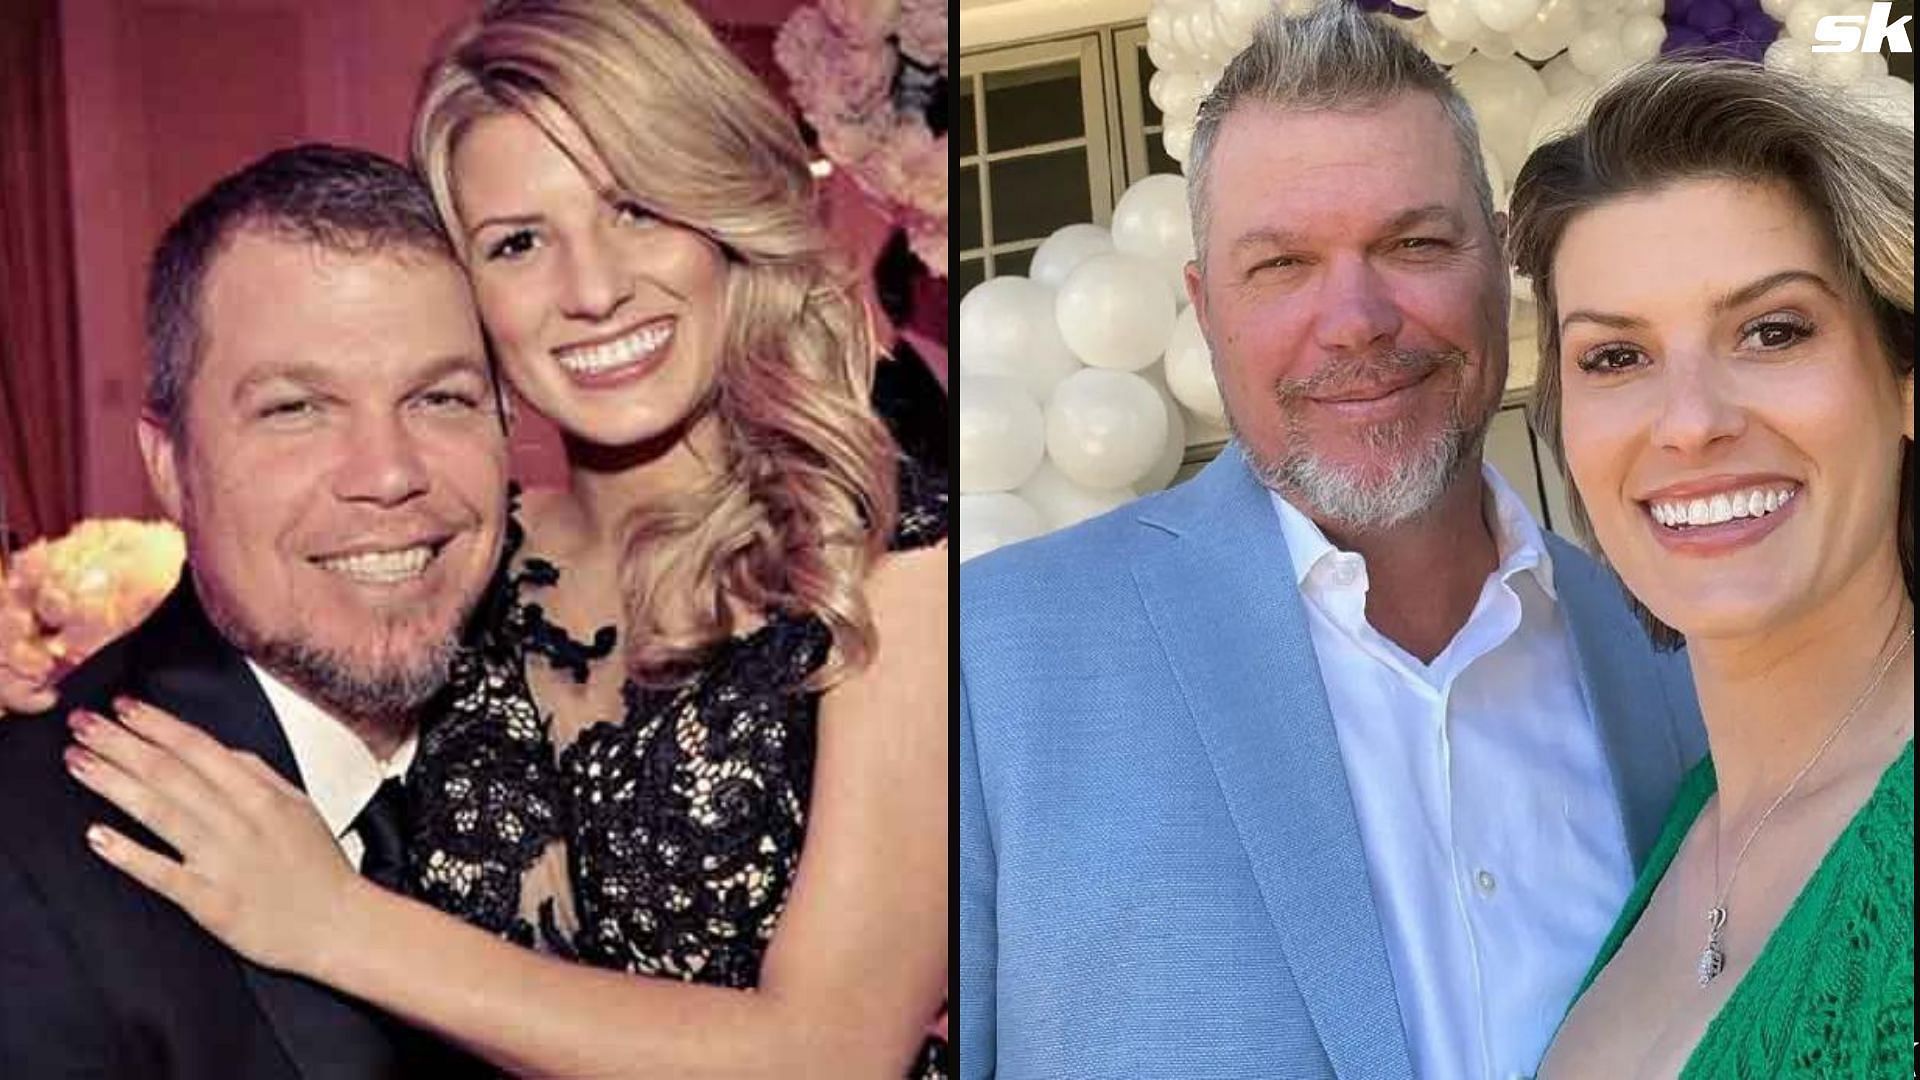 Chipper jones and his wife taylor Higgins